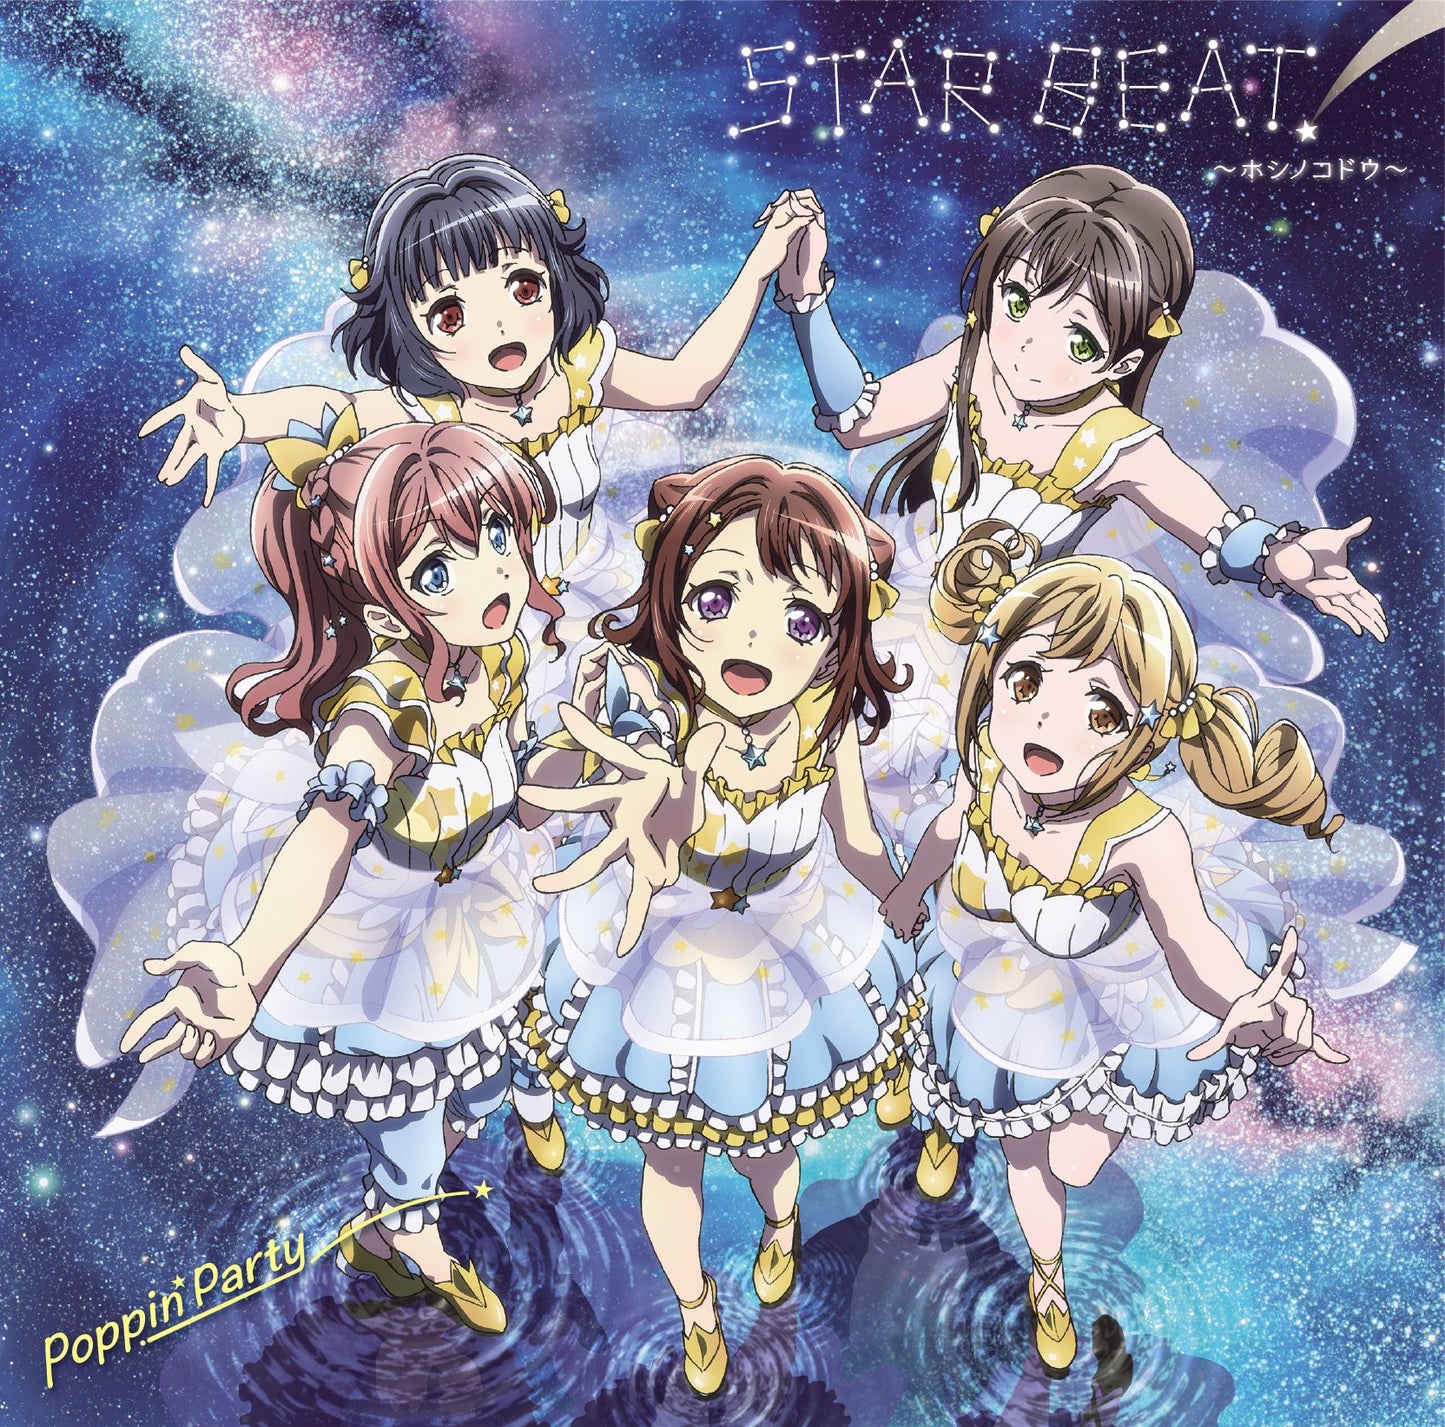 Poppin'Party 2nd Single "Star Beat!"